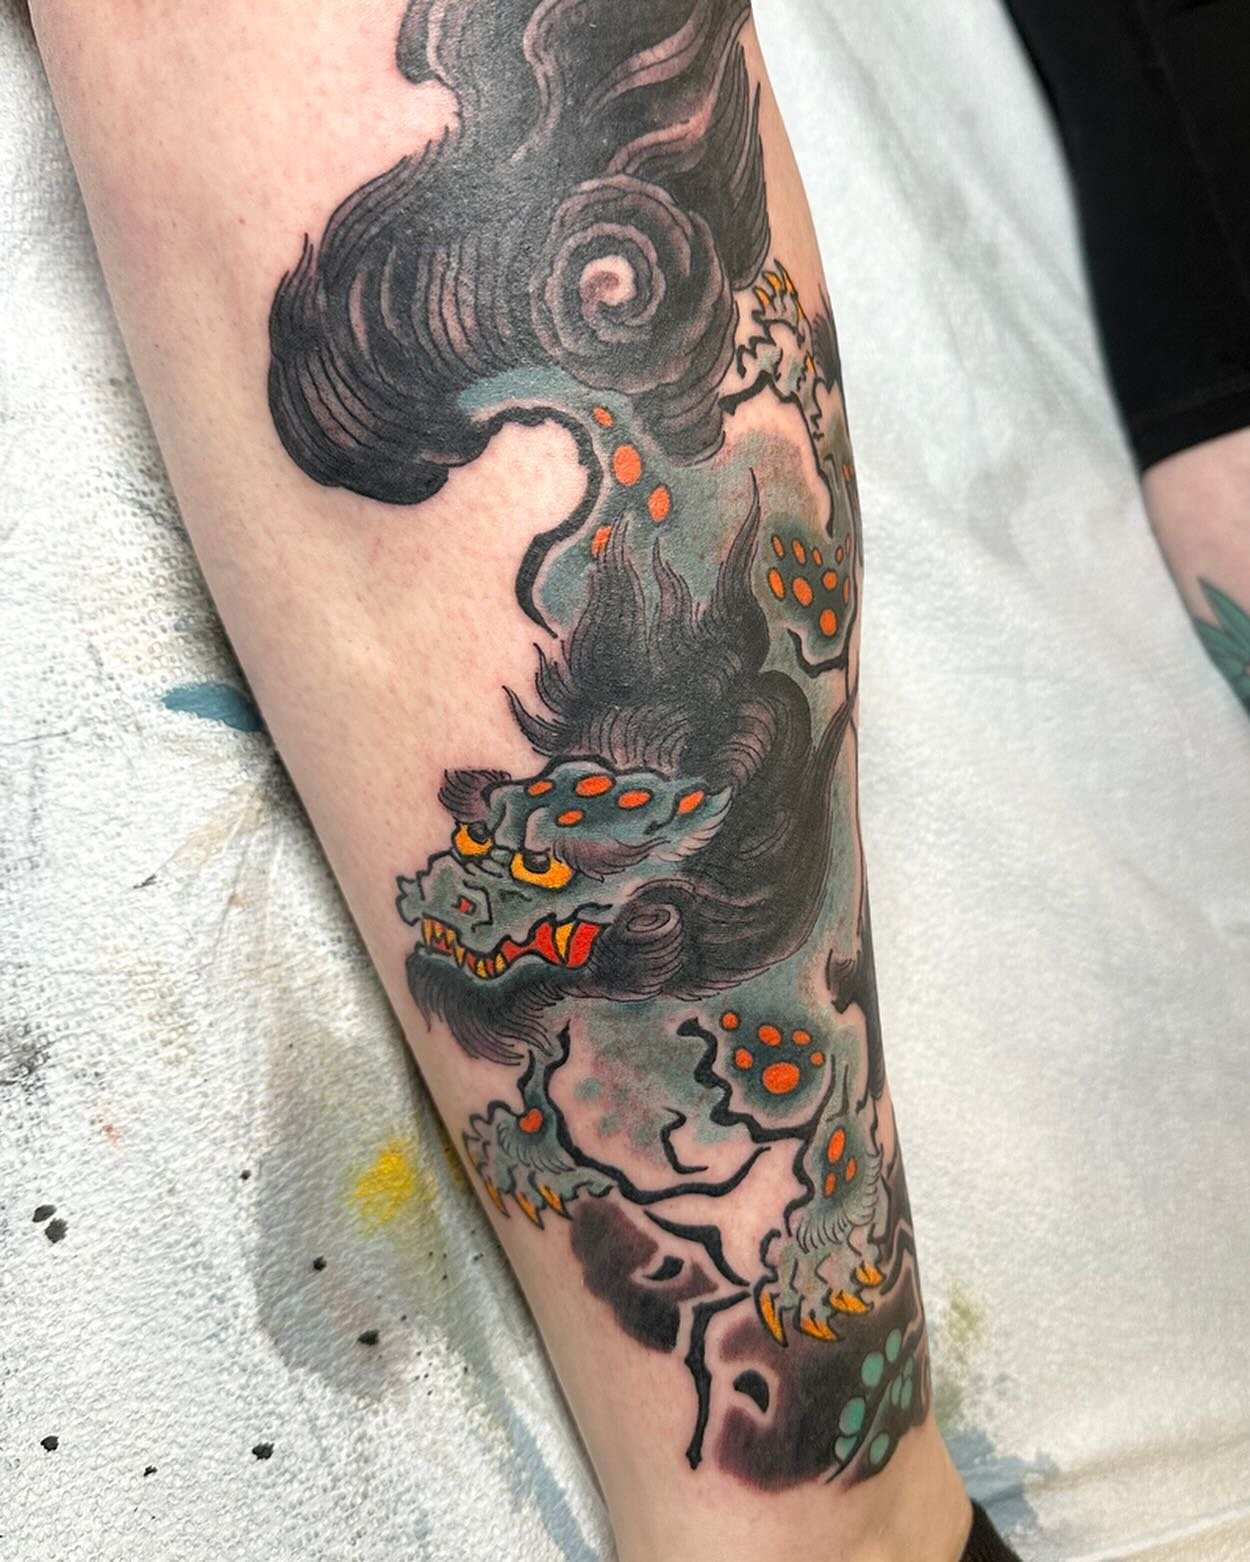 Thanks for your trust 🙏
📍 @greenpointtattooco 
Now booking for the summer 👉 Call the shop or fill out my booking form (link in bio) 
.
.
.
.
.
.
.
.
.
.
#tattoos #tattooartist #foodog #foodogtattoos #japaneseart #japanesetattoo #greenpointtattooco